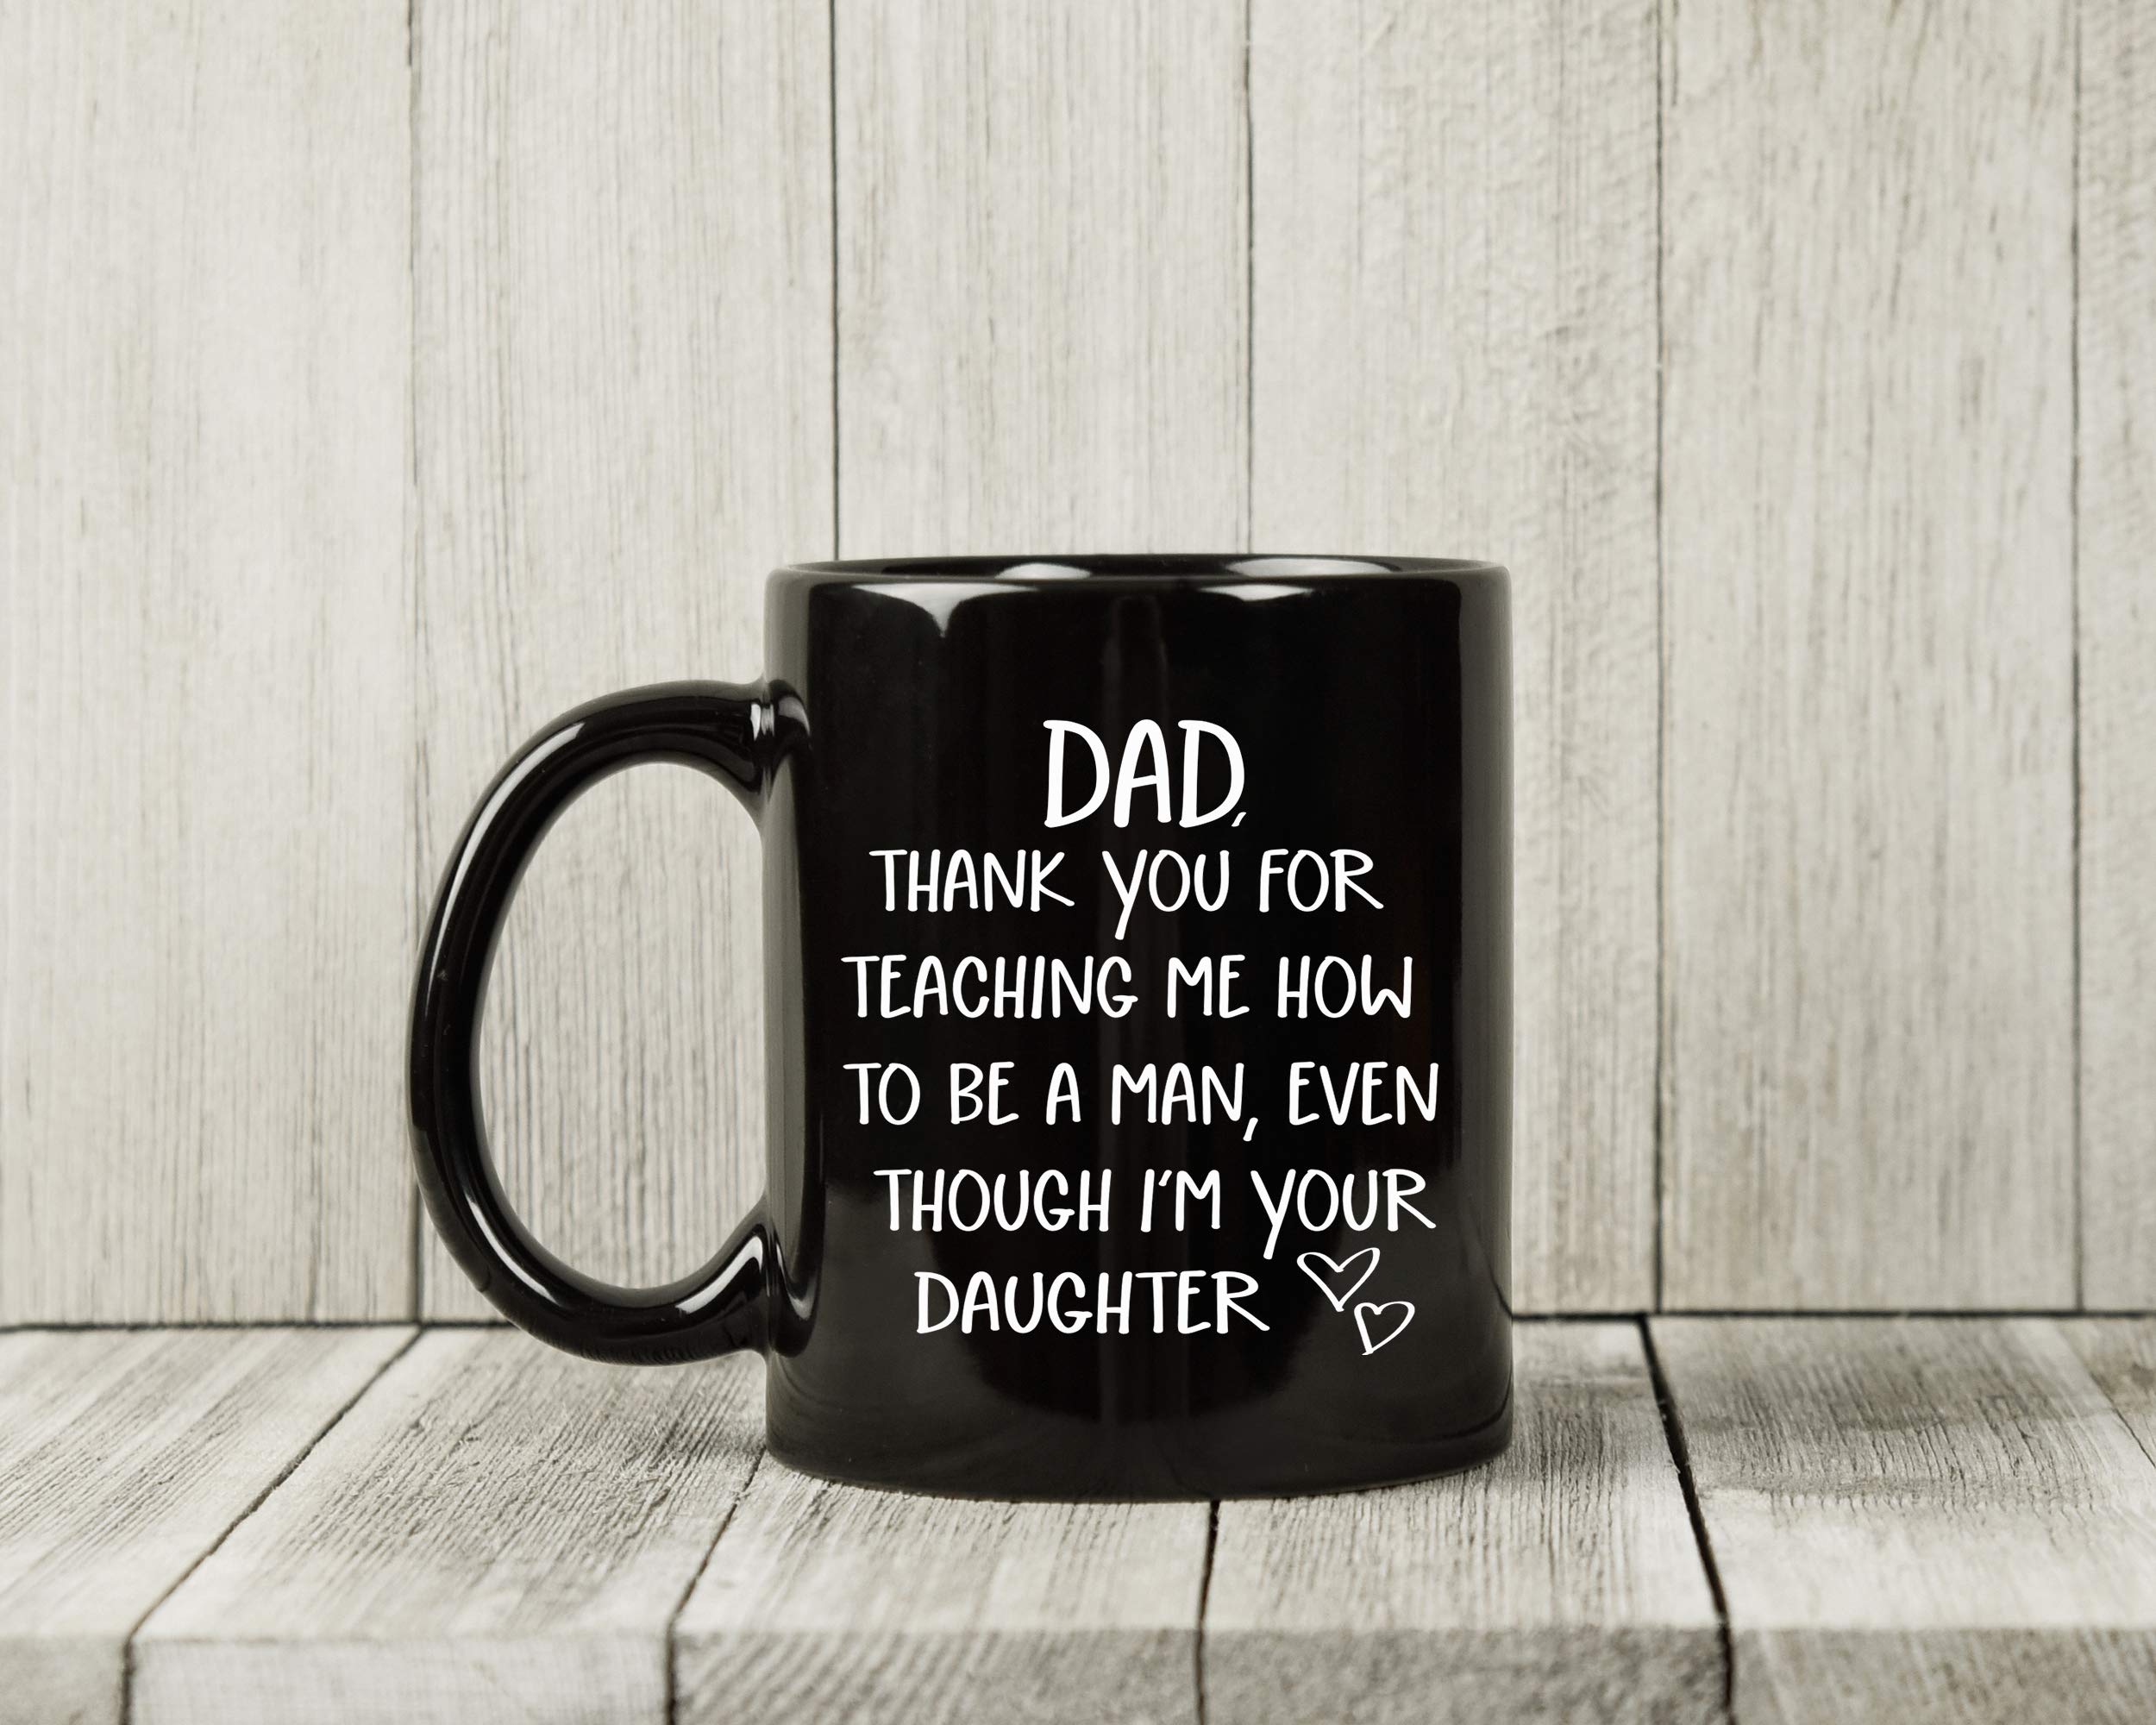 Gifts for Dad From Daughter - Dad Mug from Daughter - Gag Novelty Funny Coffee Cup for Dads - Father's Day, Dad Birthday Gift, Christmas Ideas "Thank You for Teaching" - 11oz